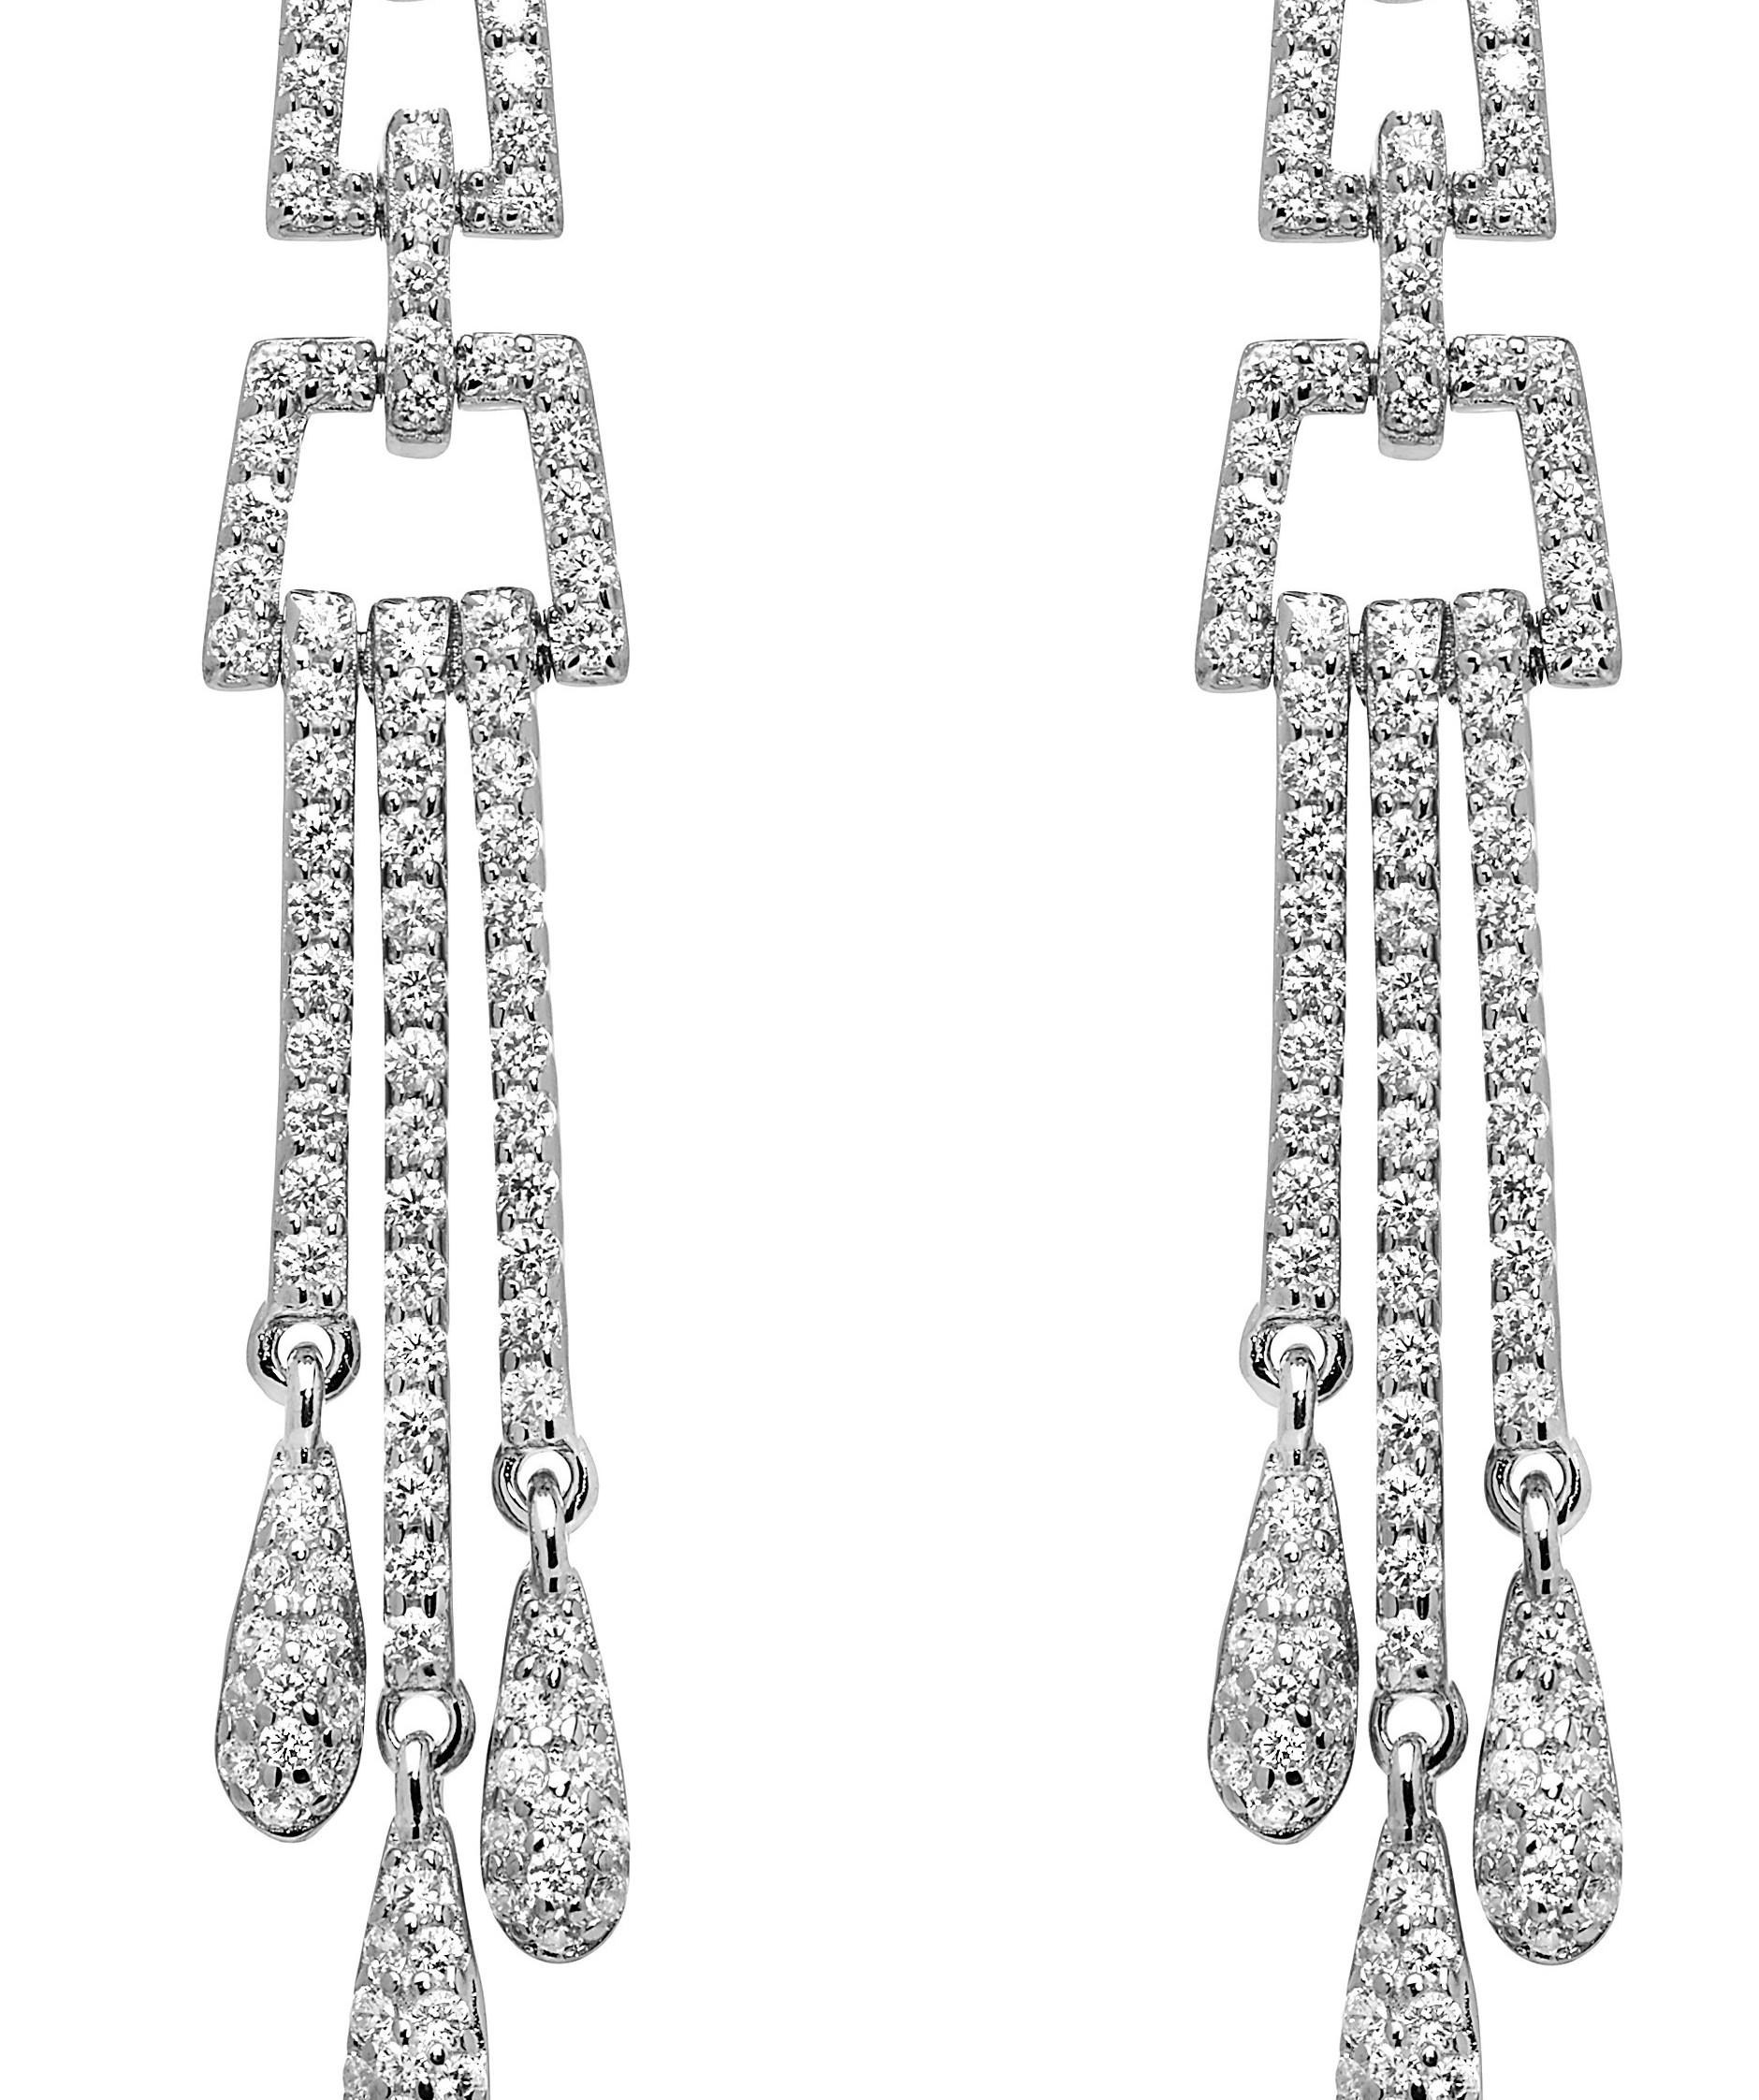 Art Deco Style Sterling Silver Hand Finished 2.68 Carat Cubic Zirconia Chandelier Drop Earrings

Inspired by the geometric designs favoured in the Art Deco period, this stunning pair of earrings will transport you to another era.

Featuring 224